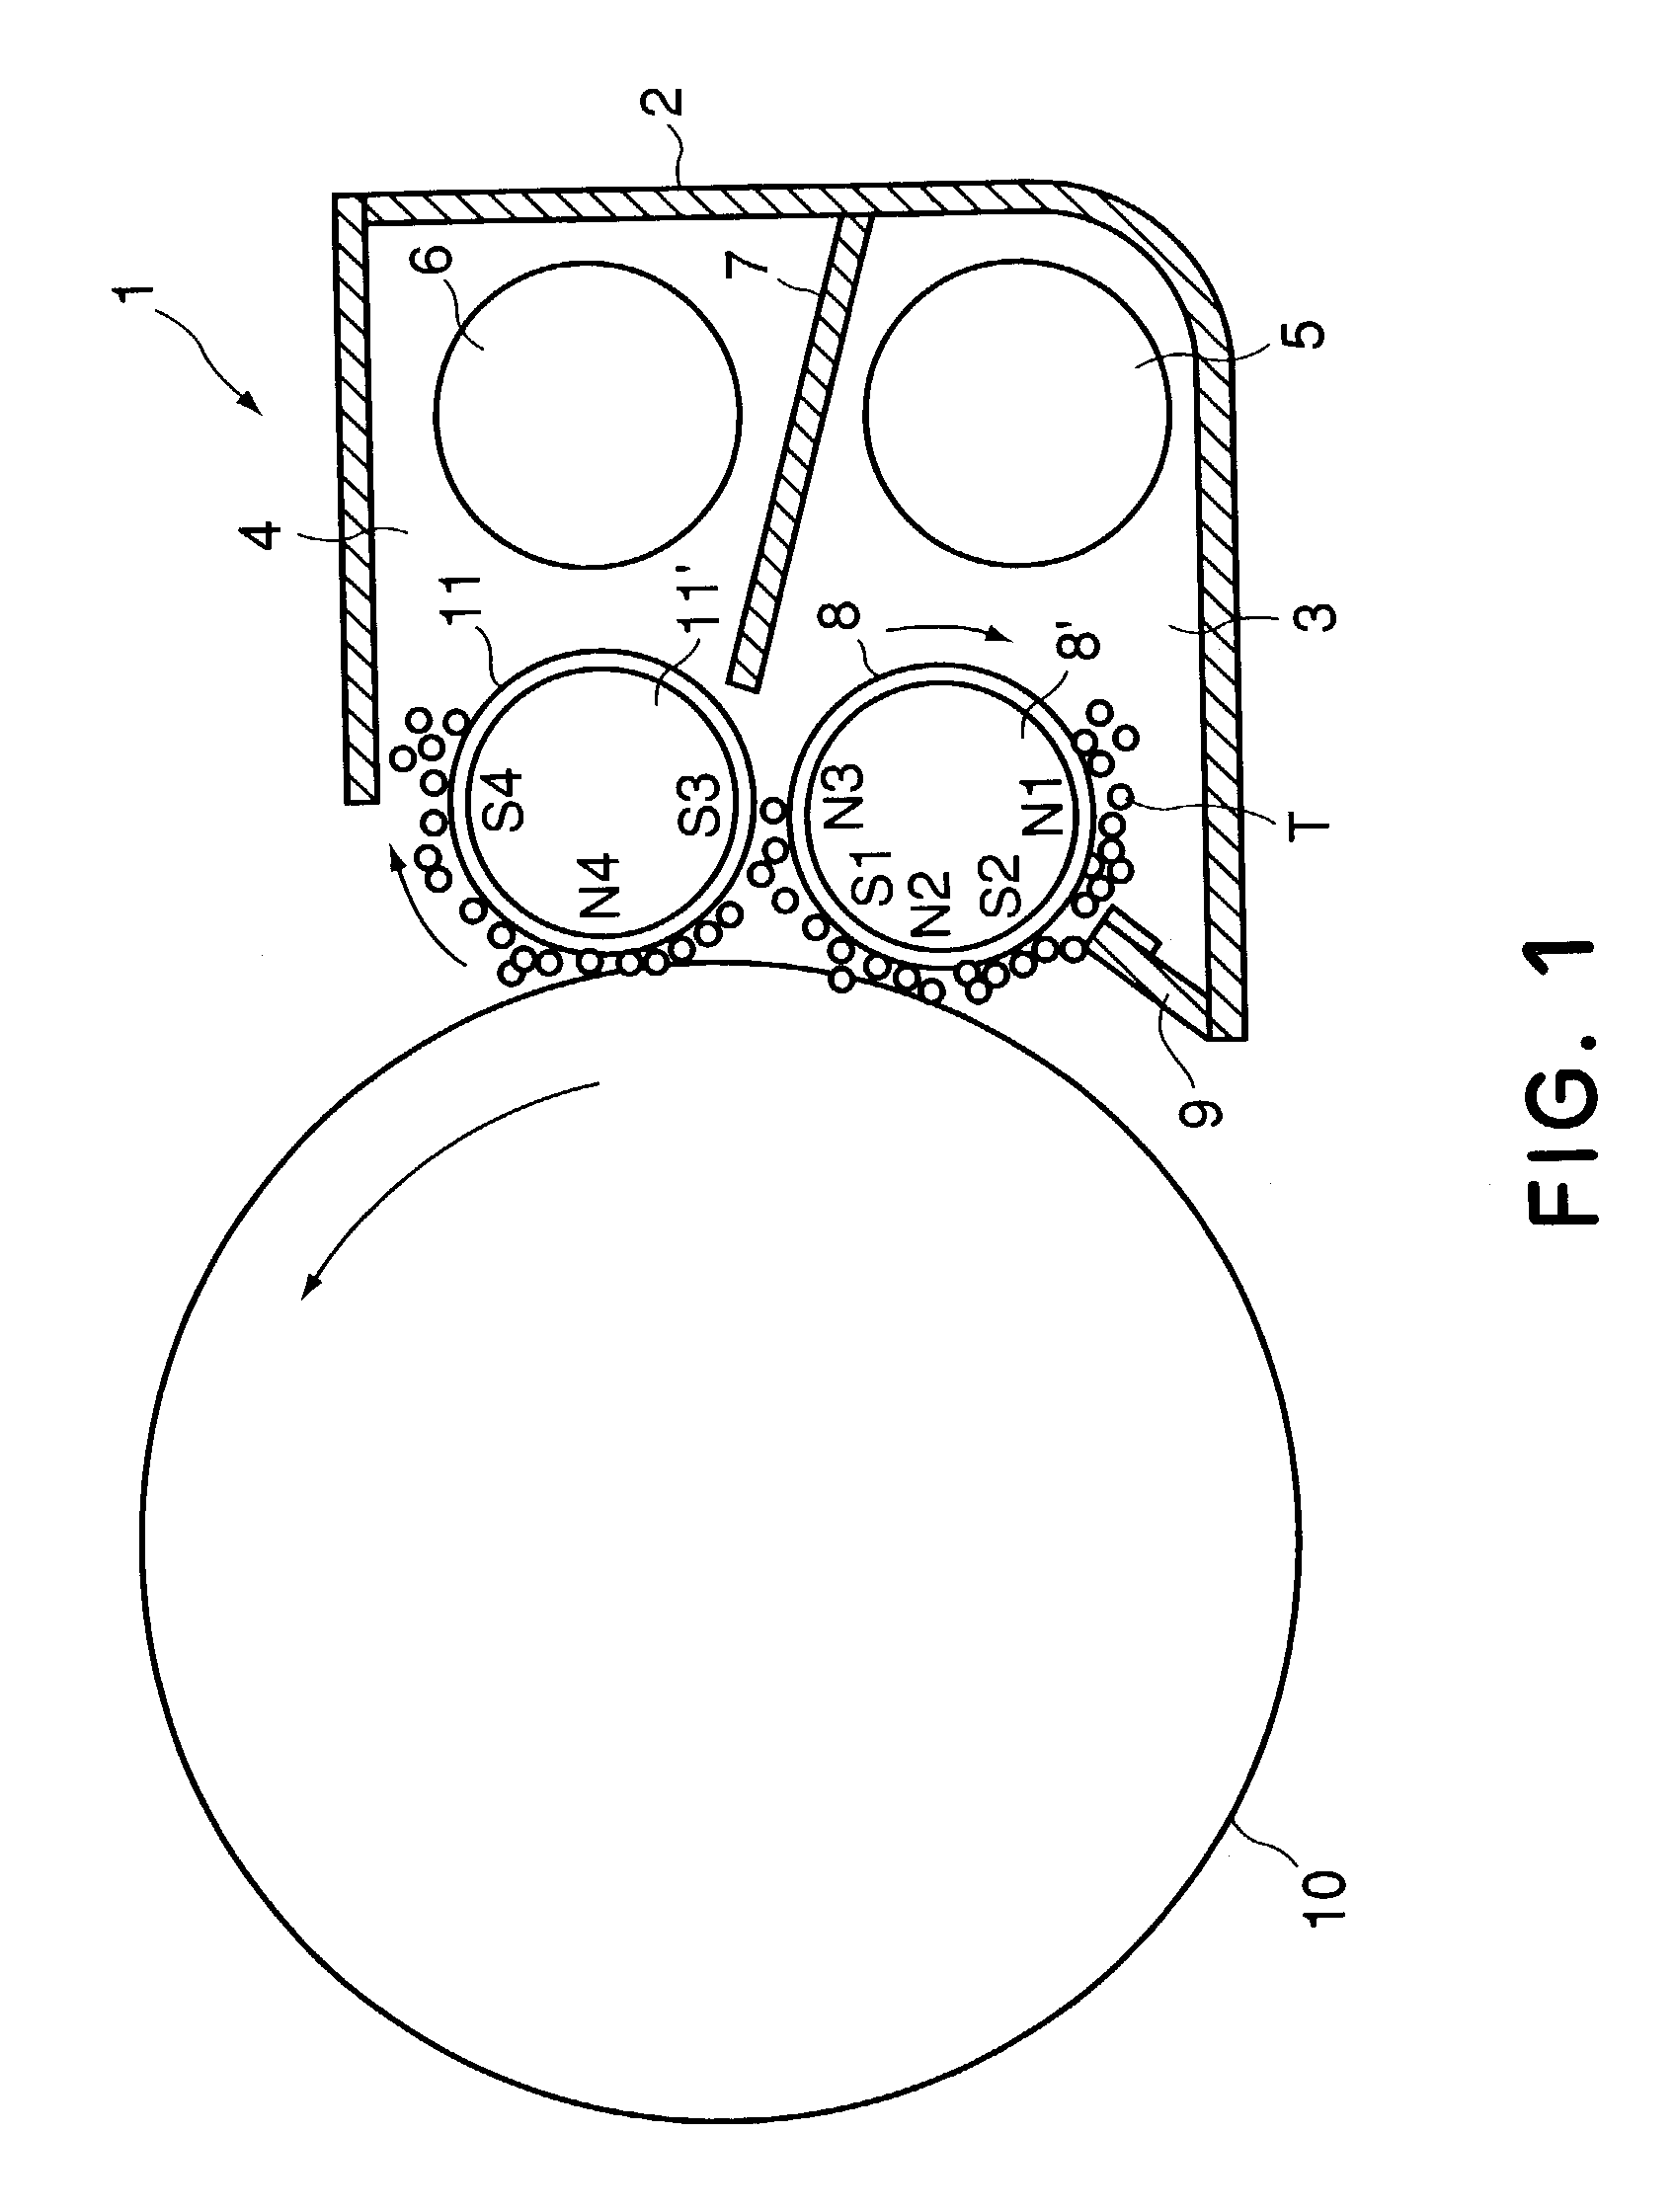 Developing apparatus with two developing chamber-rotatable member pairs